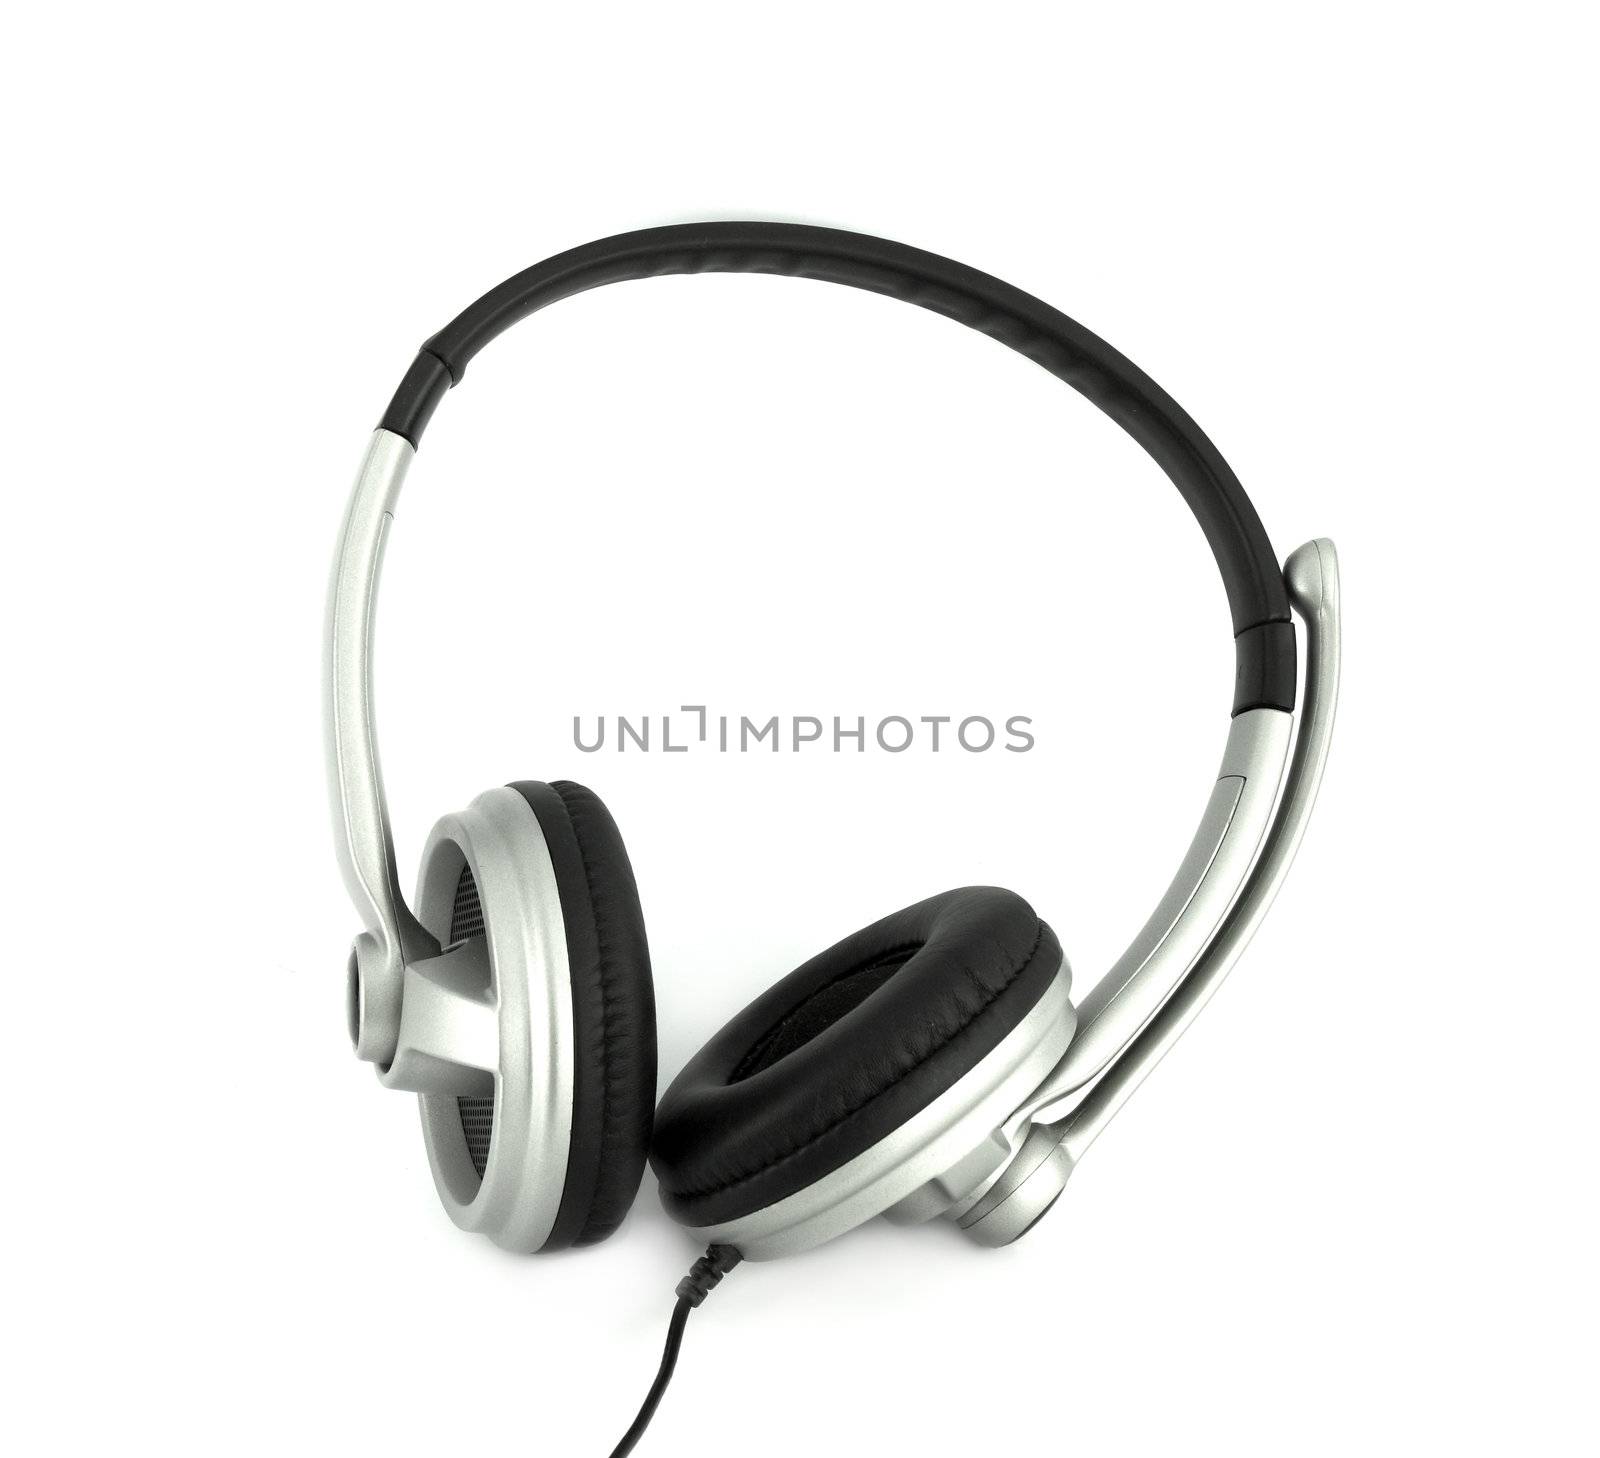 Audio headset with a micro (clipping path ) by geargodz